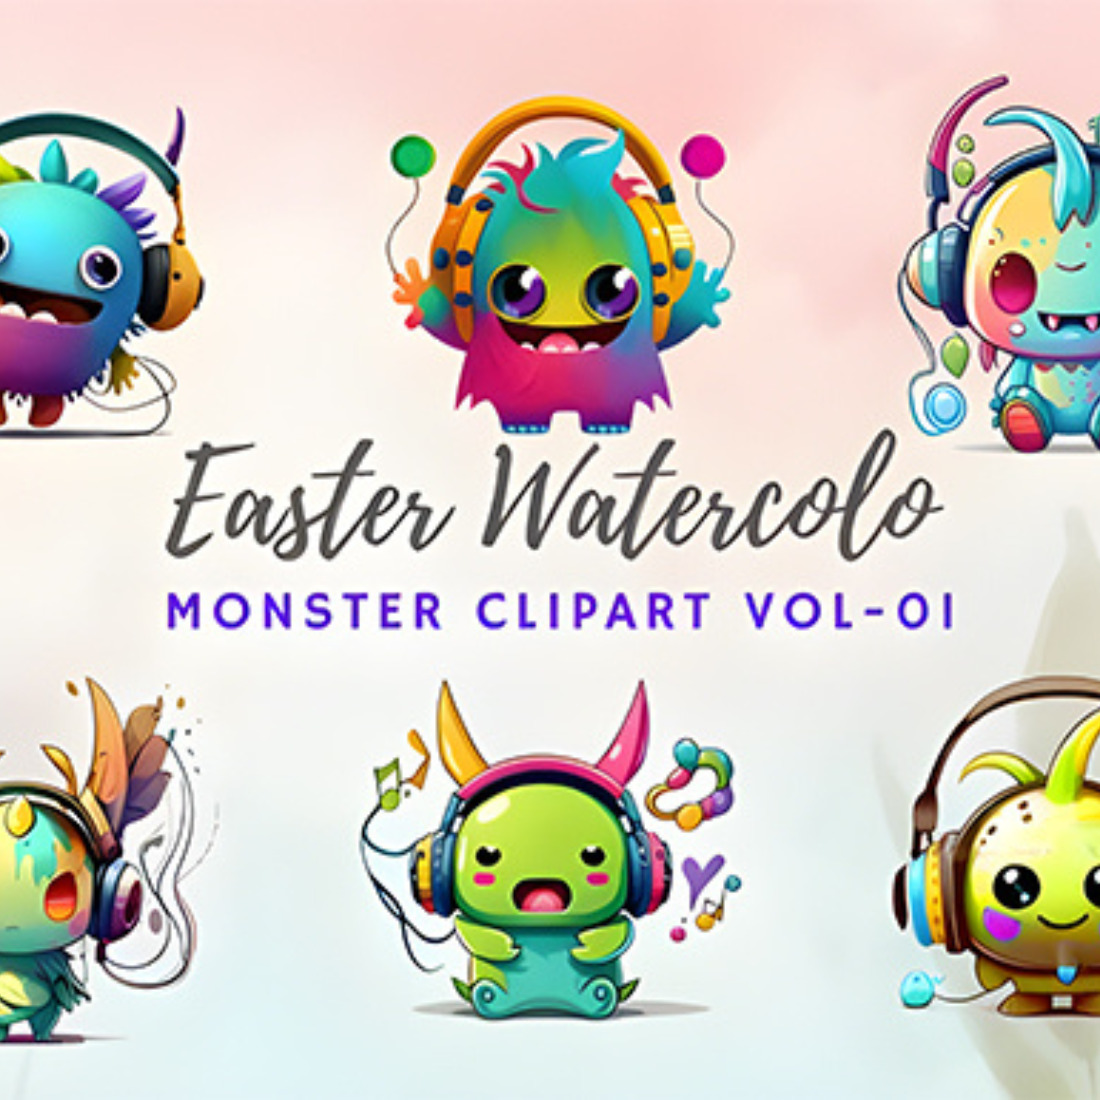 Easter Watercolor Monster Clipart Vol-01 cover image.